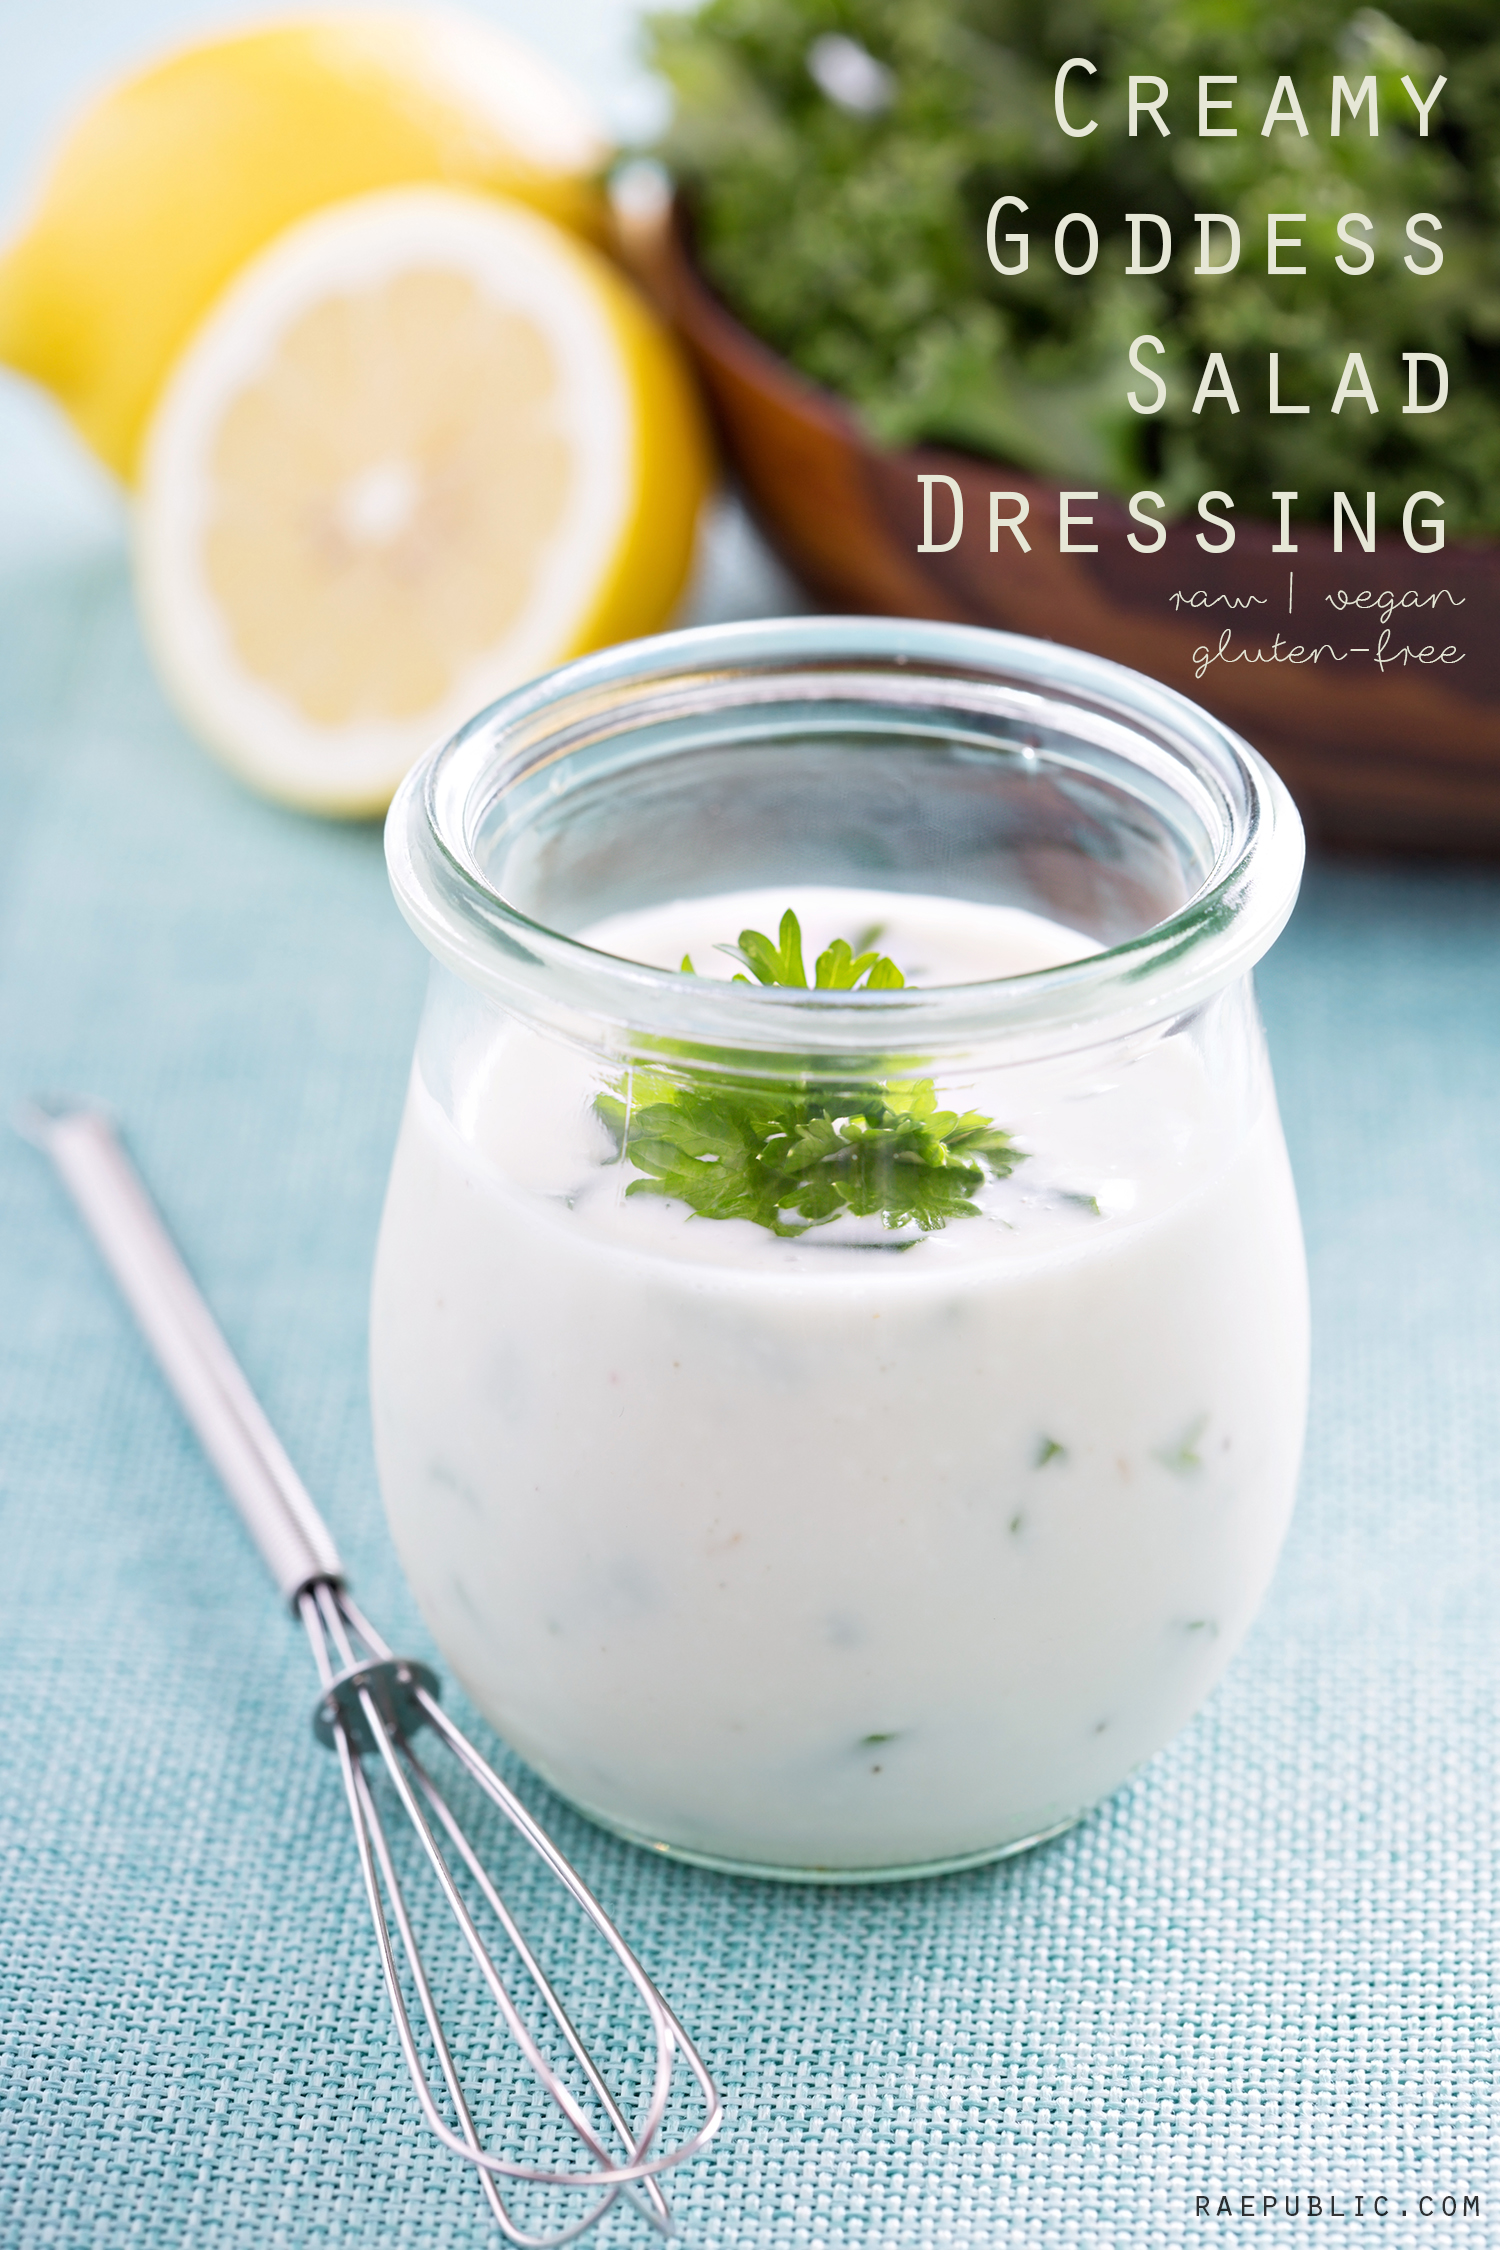 This creamy vegan salad dressing is so delicious and is perfect foR salads or dipping your favorite veggies!